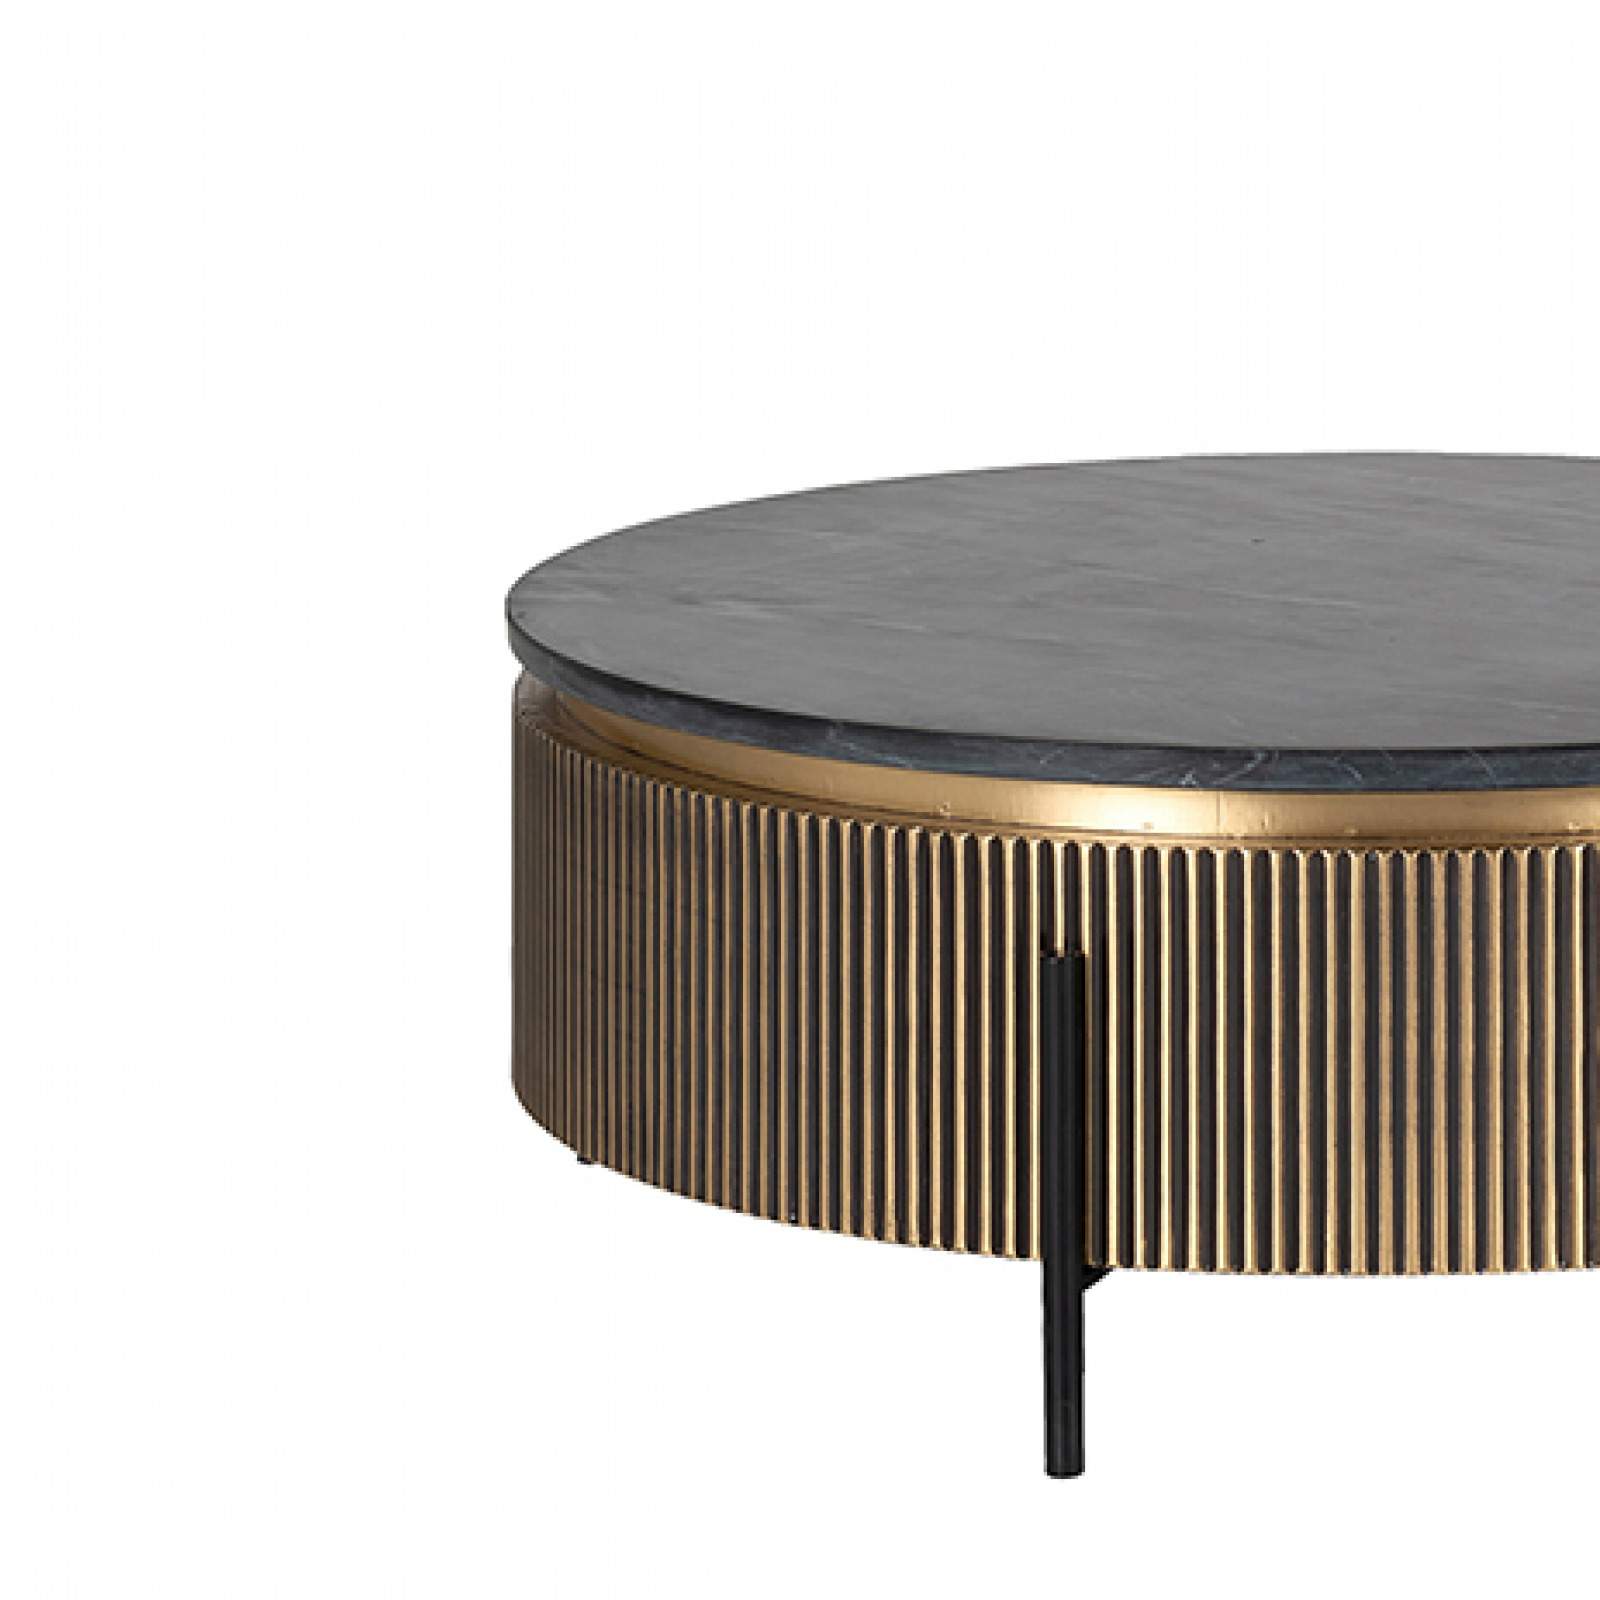 Ironville round coffee table